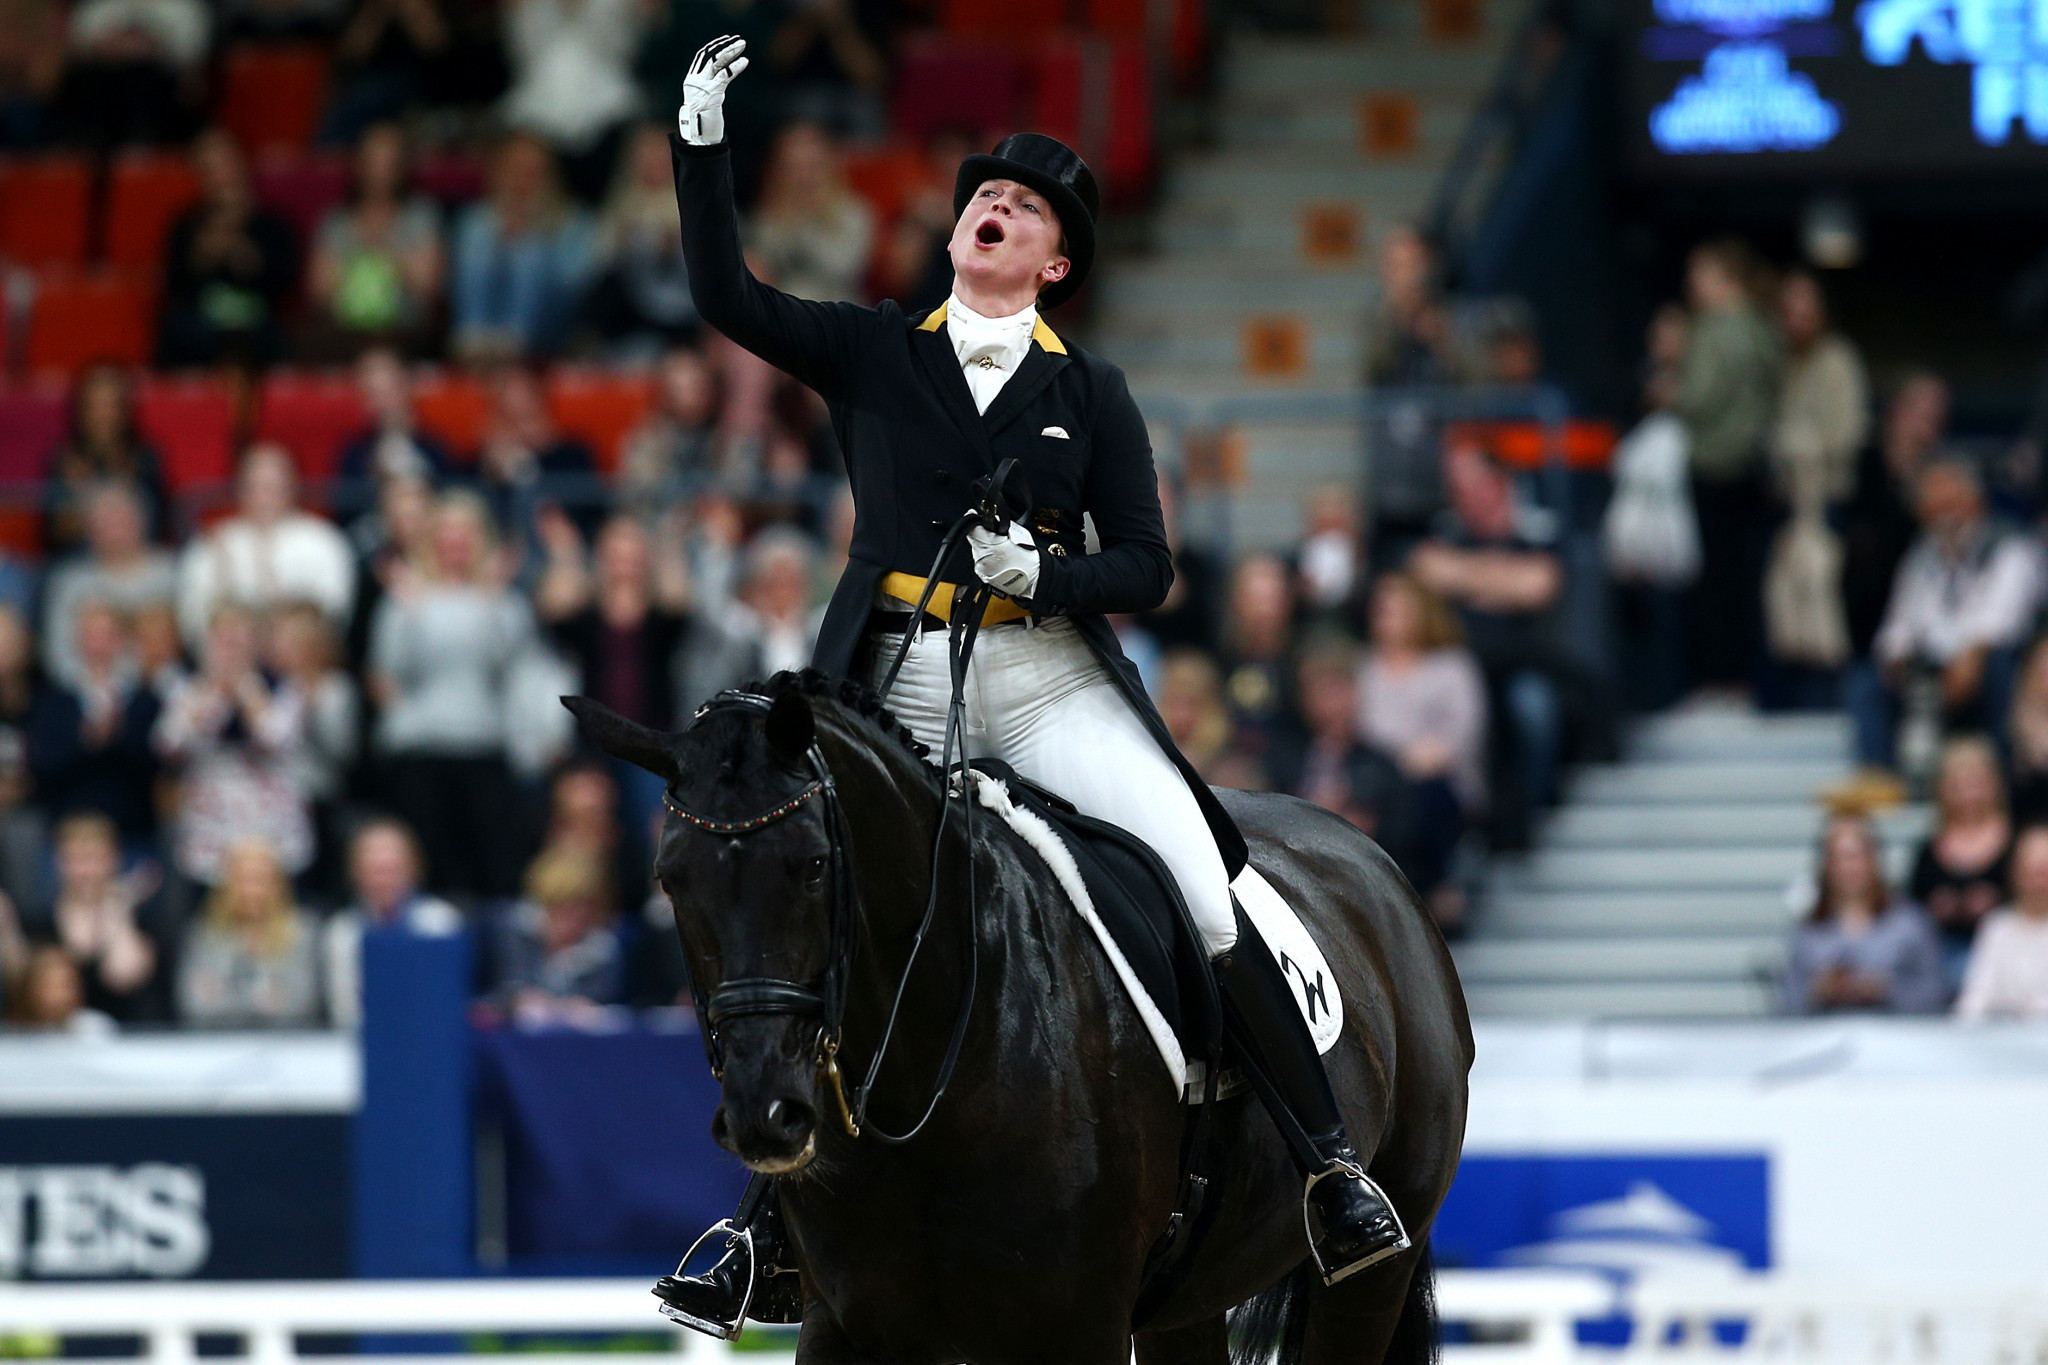 Isabell Werth is set to partner Weihegold OLD one final time in the World Cup dressage final in Leipzig ©Getty Images